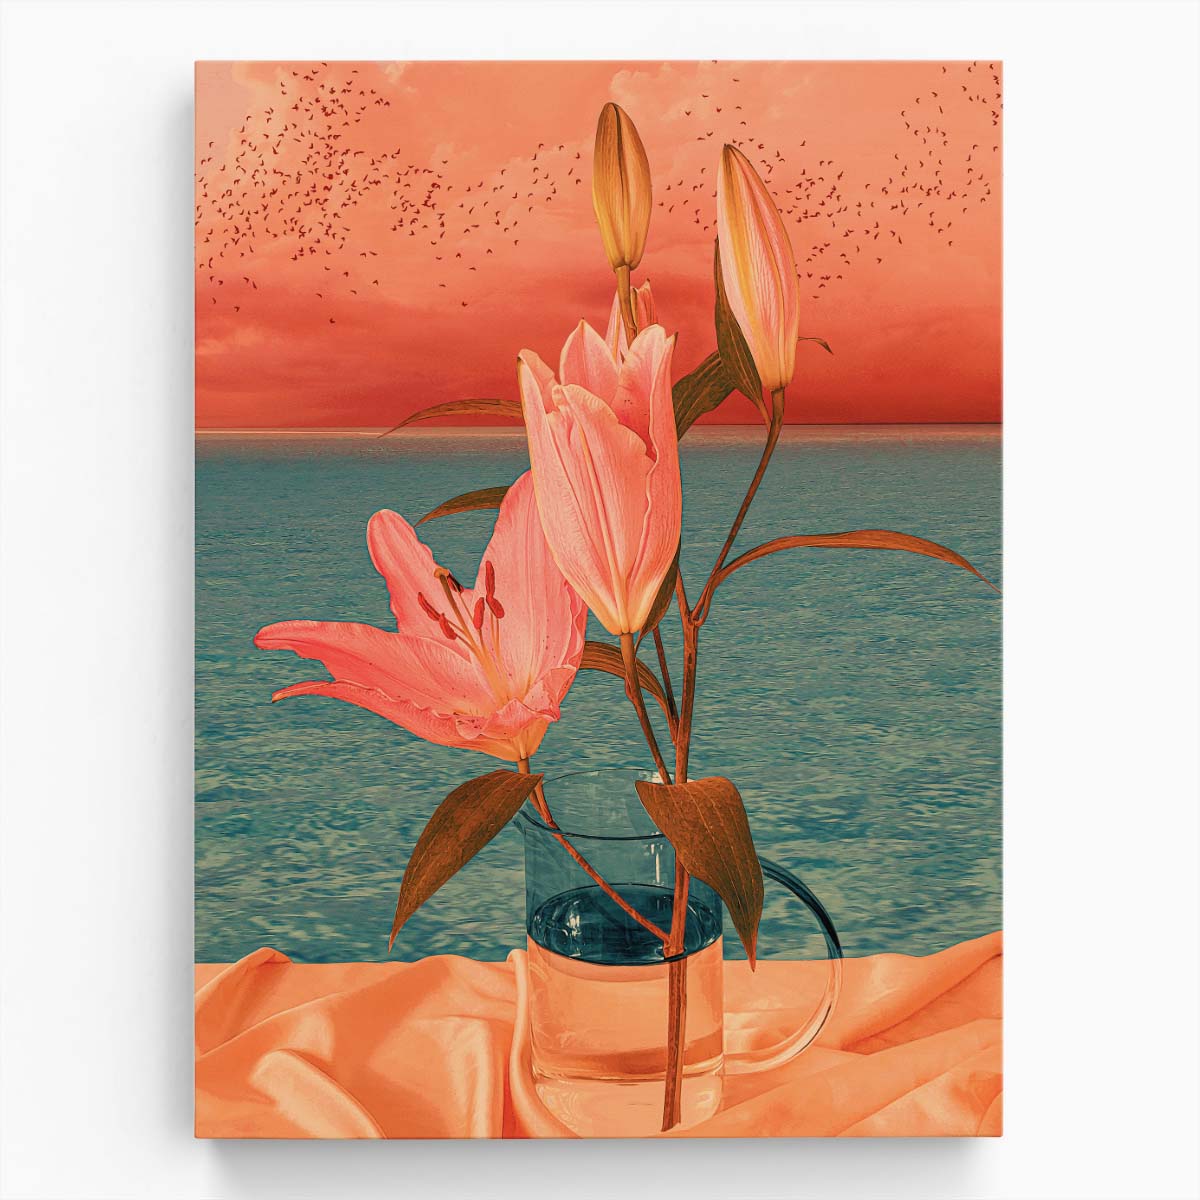 Floral Surrealism Pink Flowers with Bird in Vase Photography Art by Luxuriance Designs, made in USA